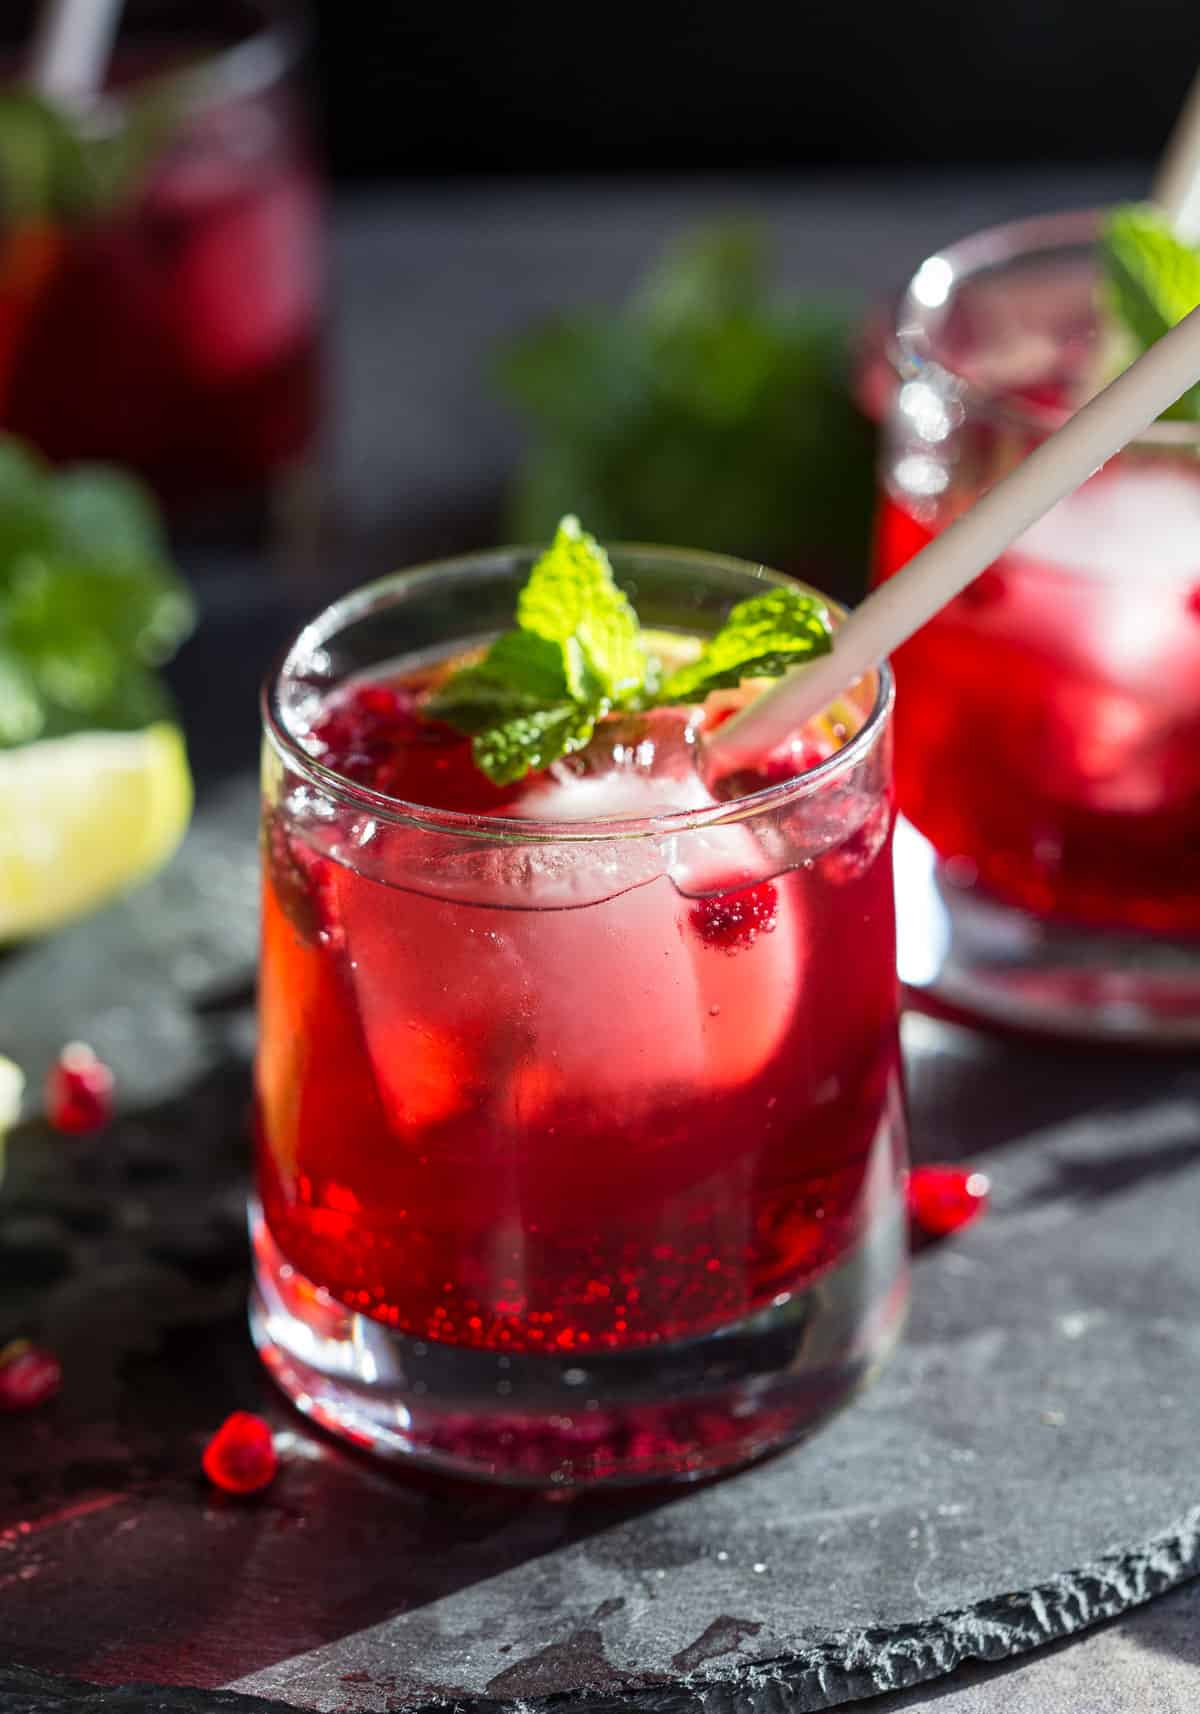 Ginger Pomegranate Spritz cocktail in a glass with a straw and fresh mint garnish
